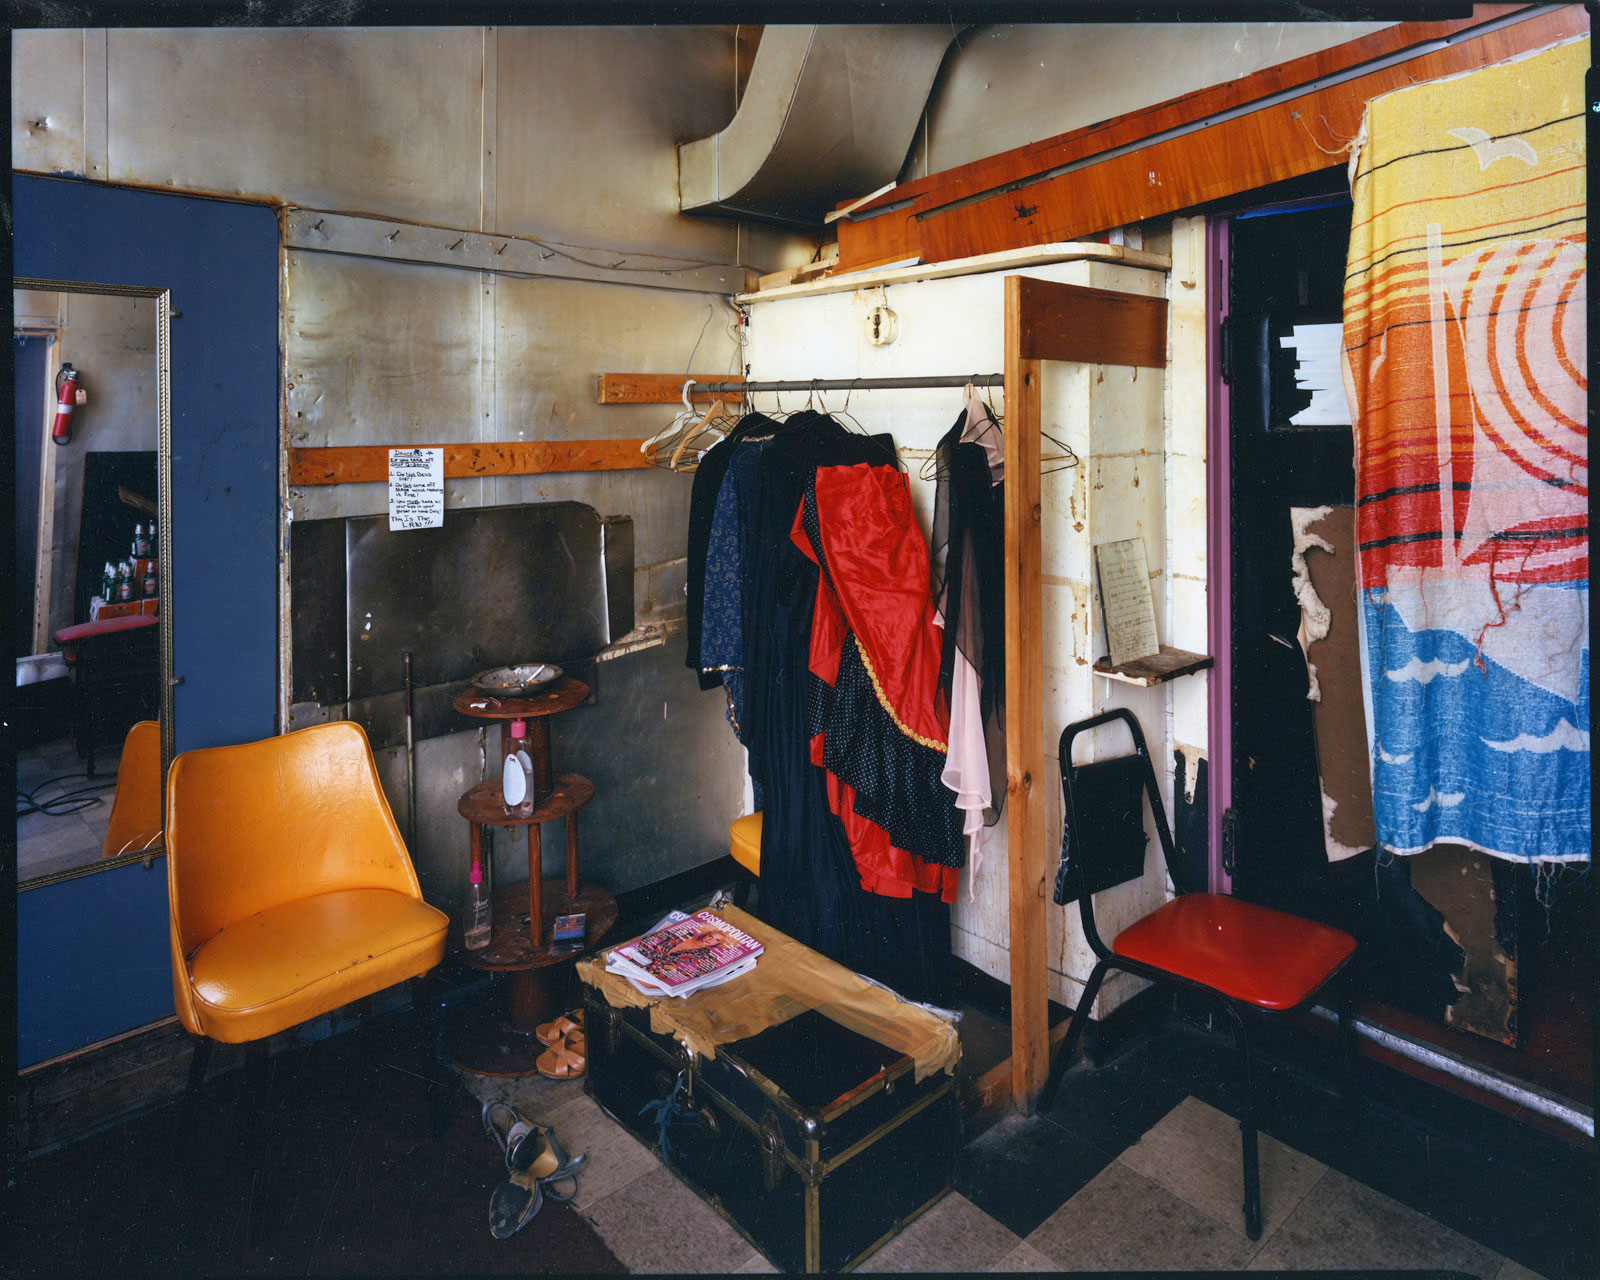 Gold chair on left, in front of mirror, trunk on floor, clothes hanging from rod